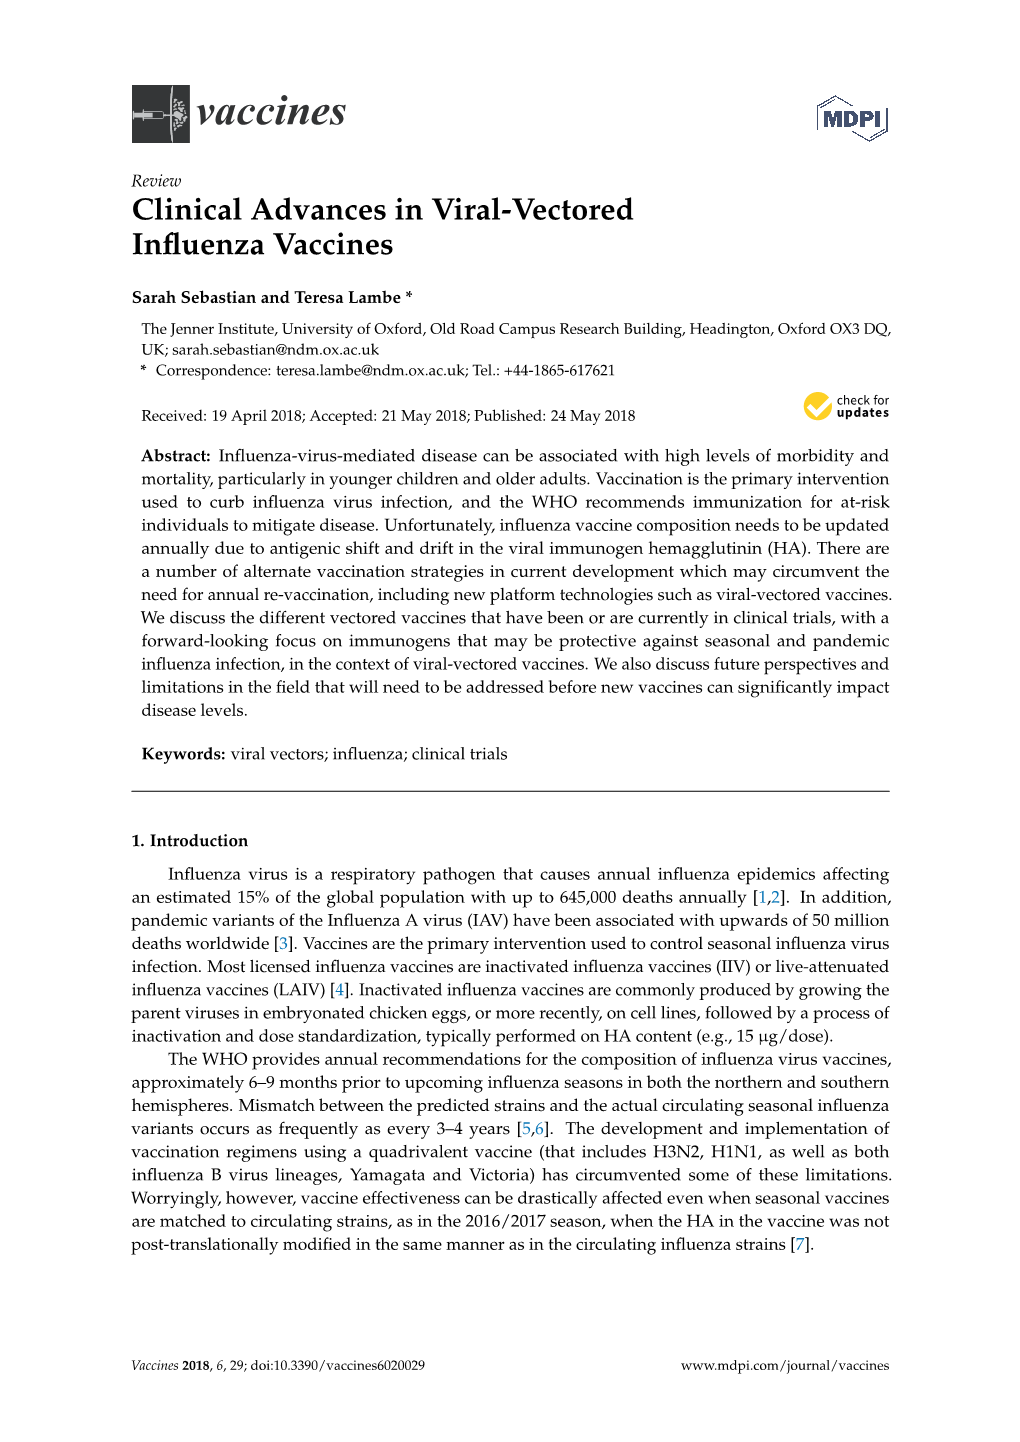 Clinical Advances in Viral-Vectored Influenza Vaccines